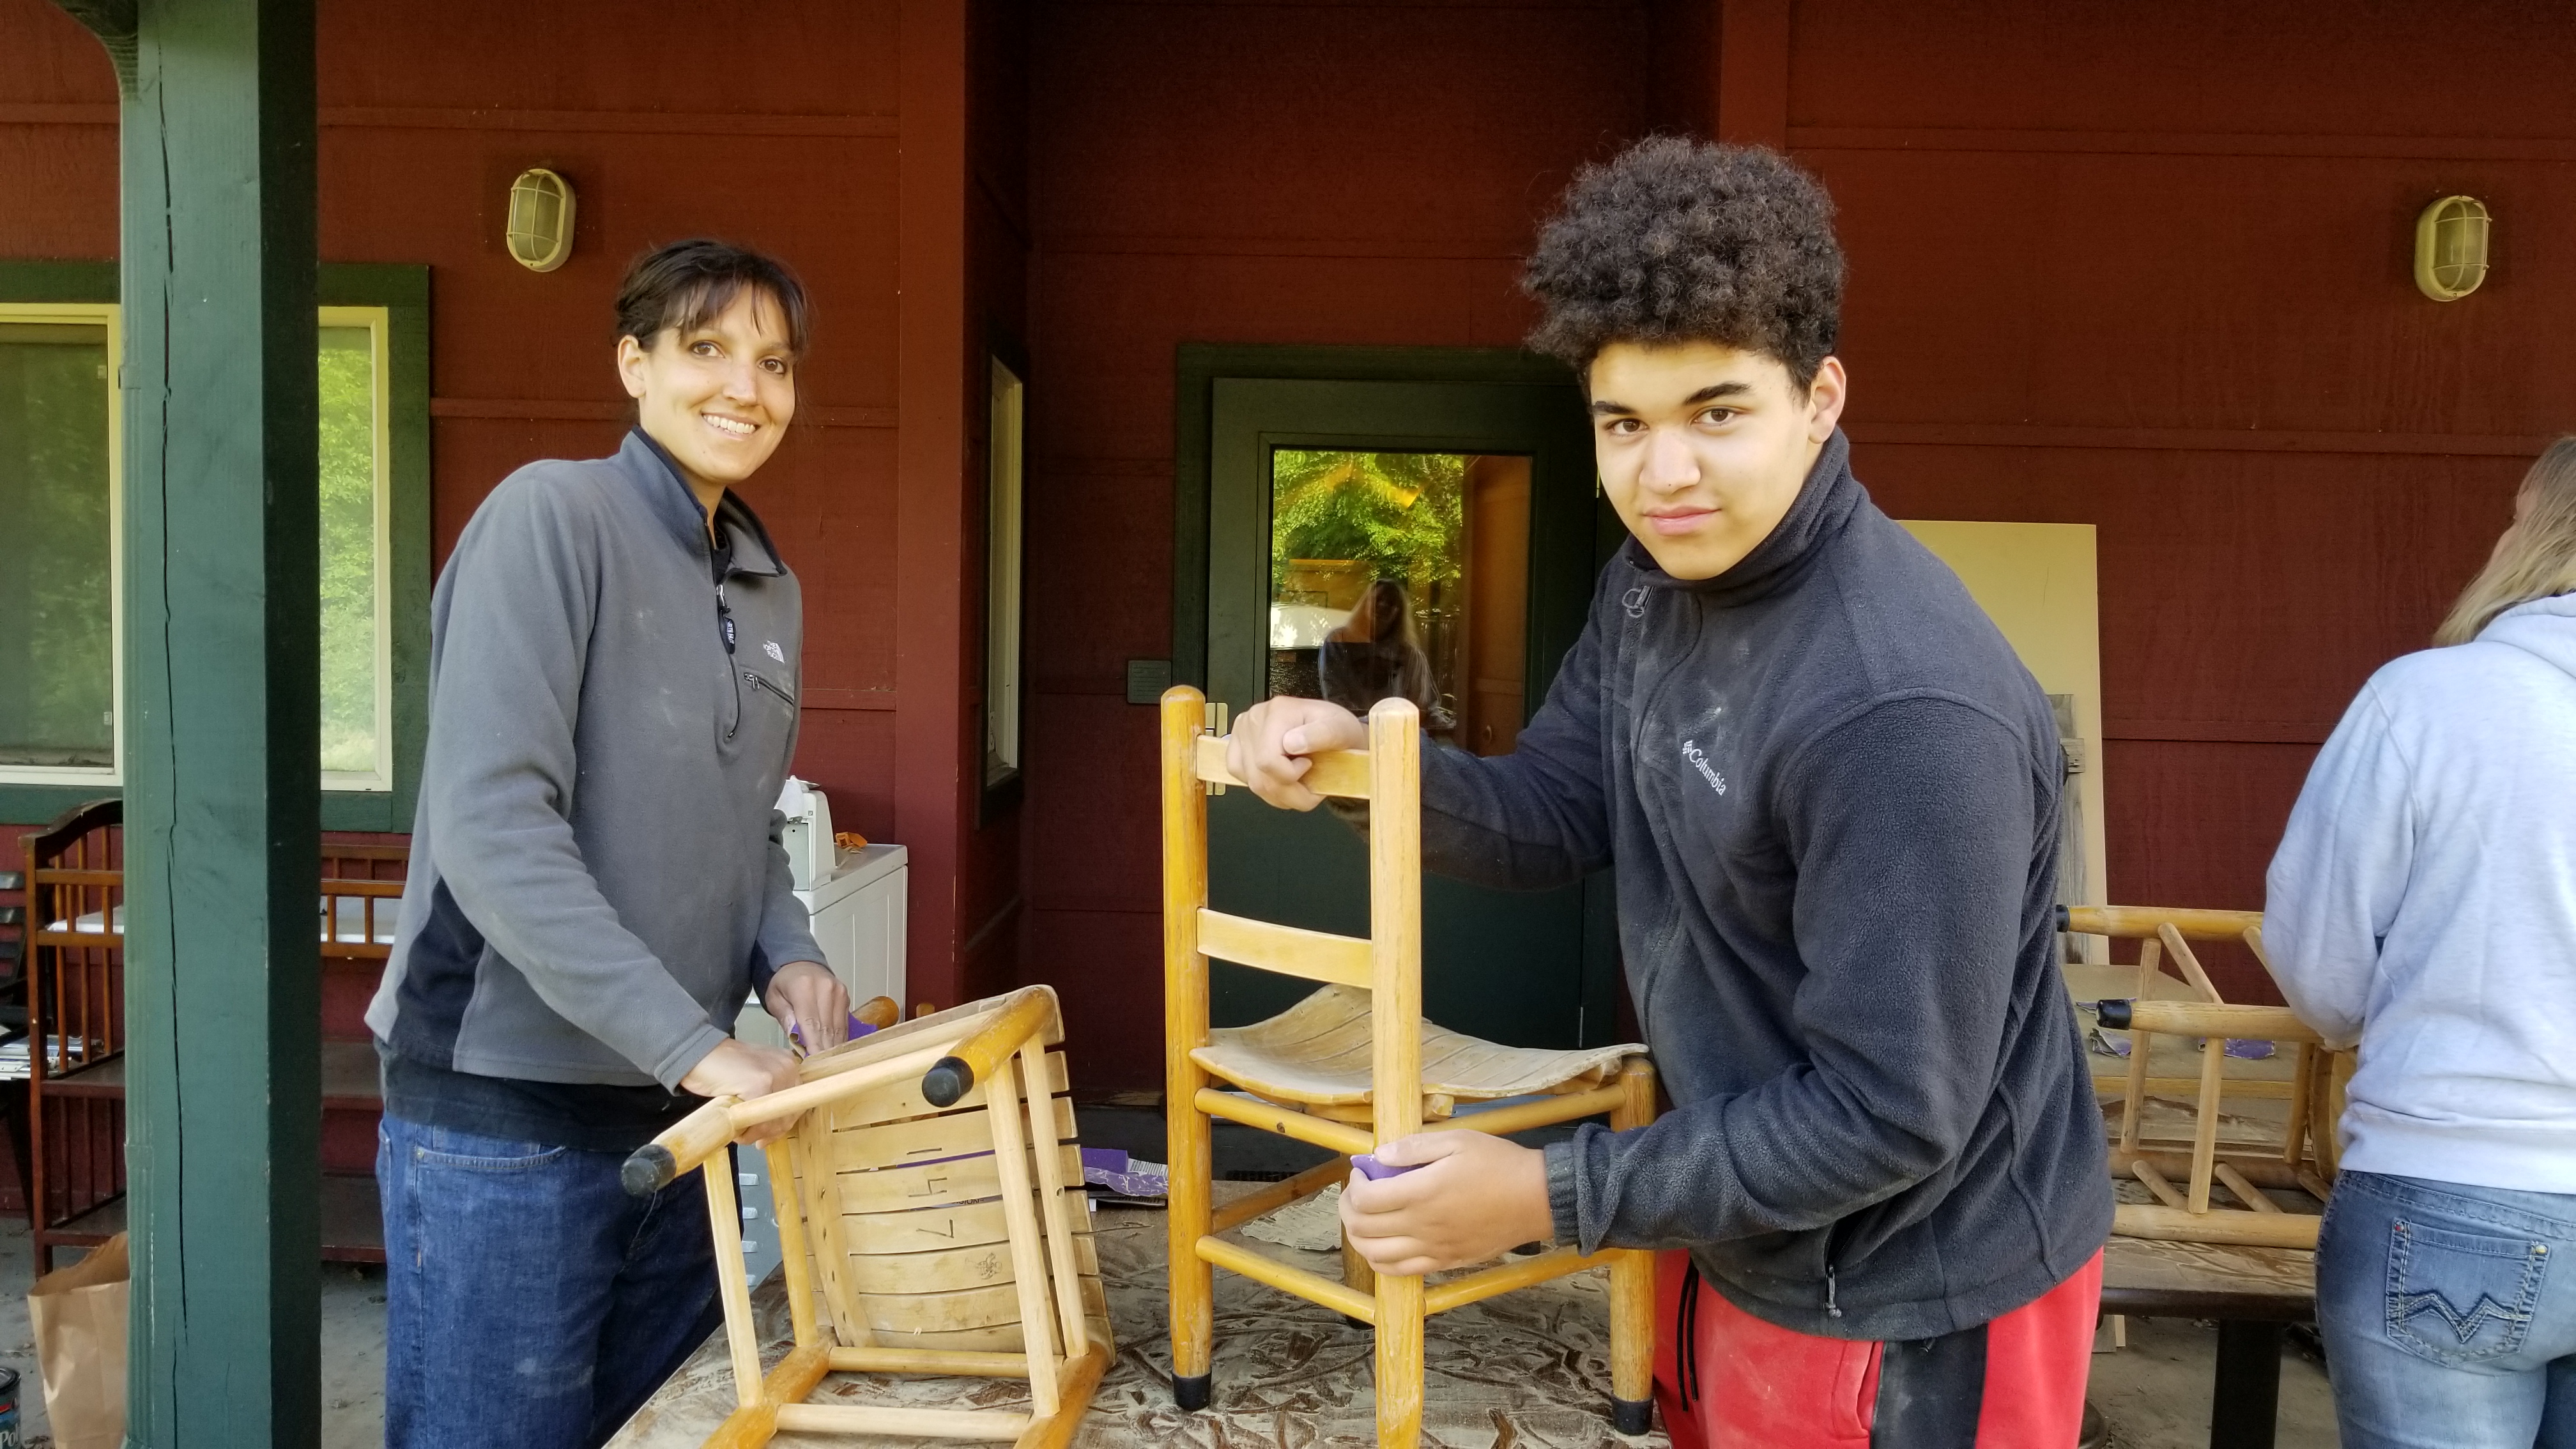 Two Day of Service Volunteers sanding child size wooden chairs.